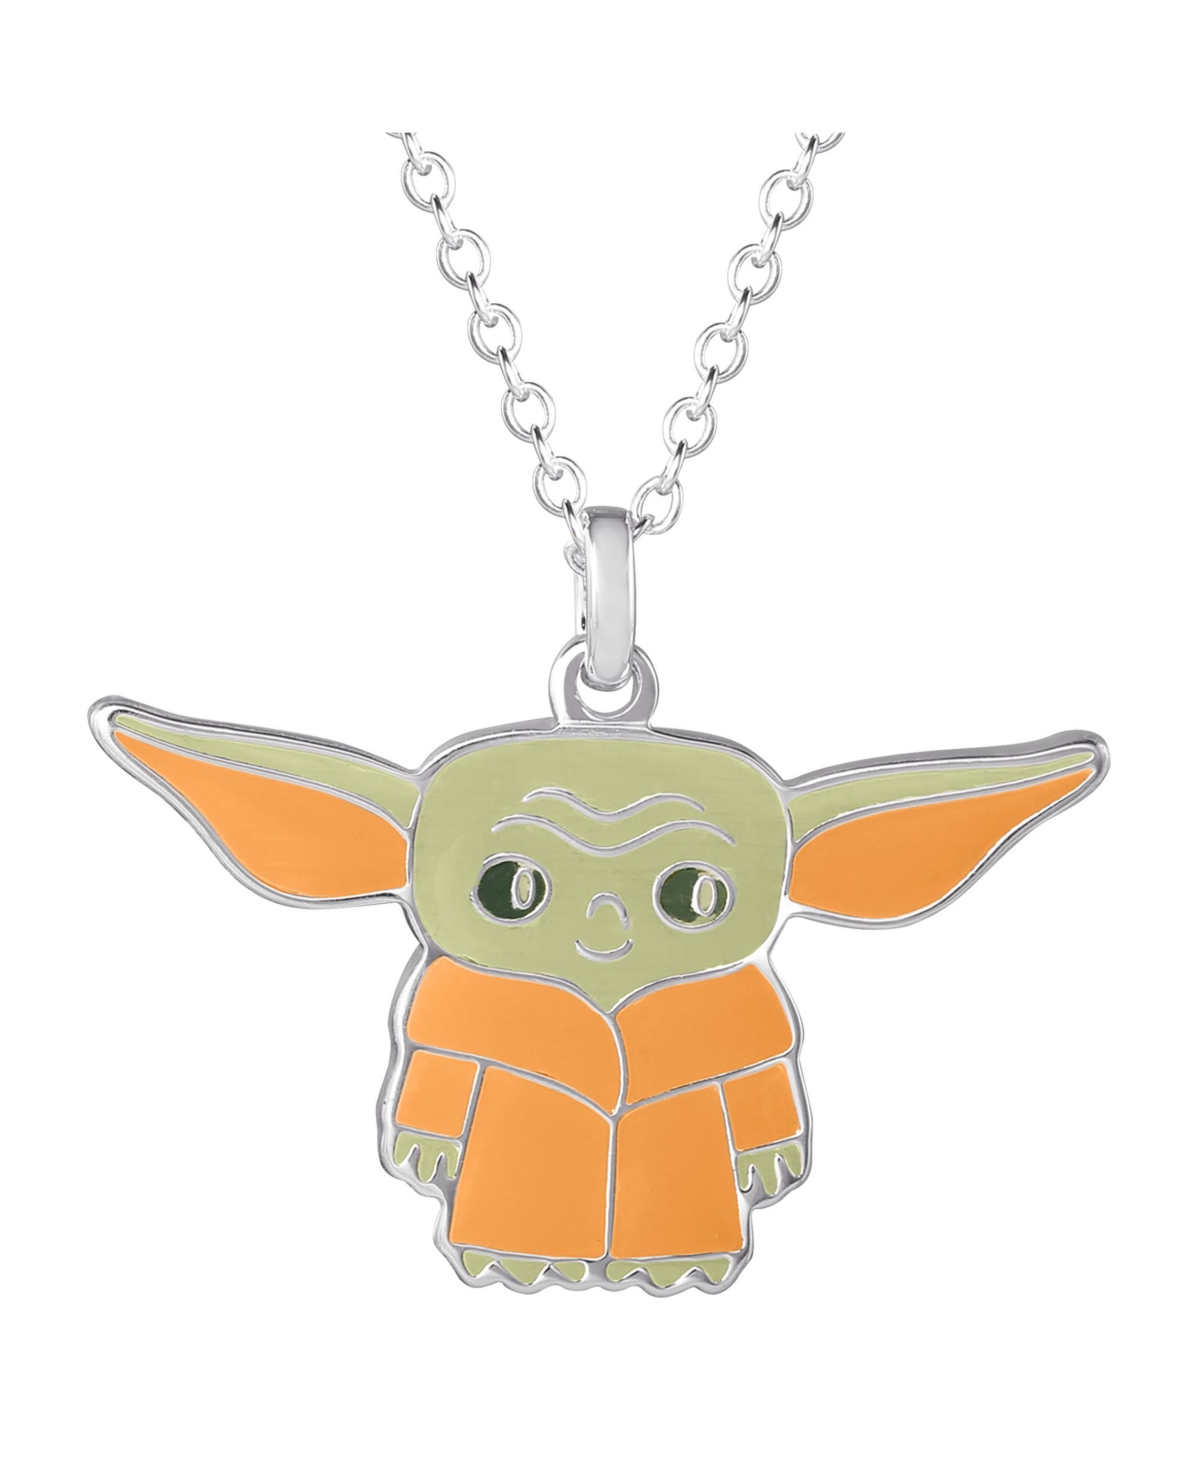 Disney Star Wars The Mandalorian Grogu Silver Plated Necklace, Official License - Silver tone, orange, green